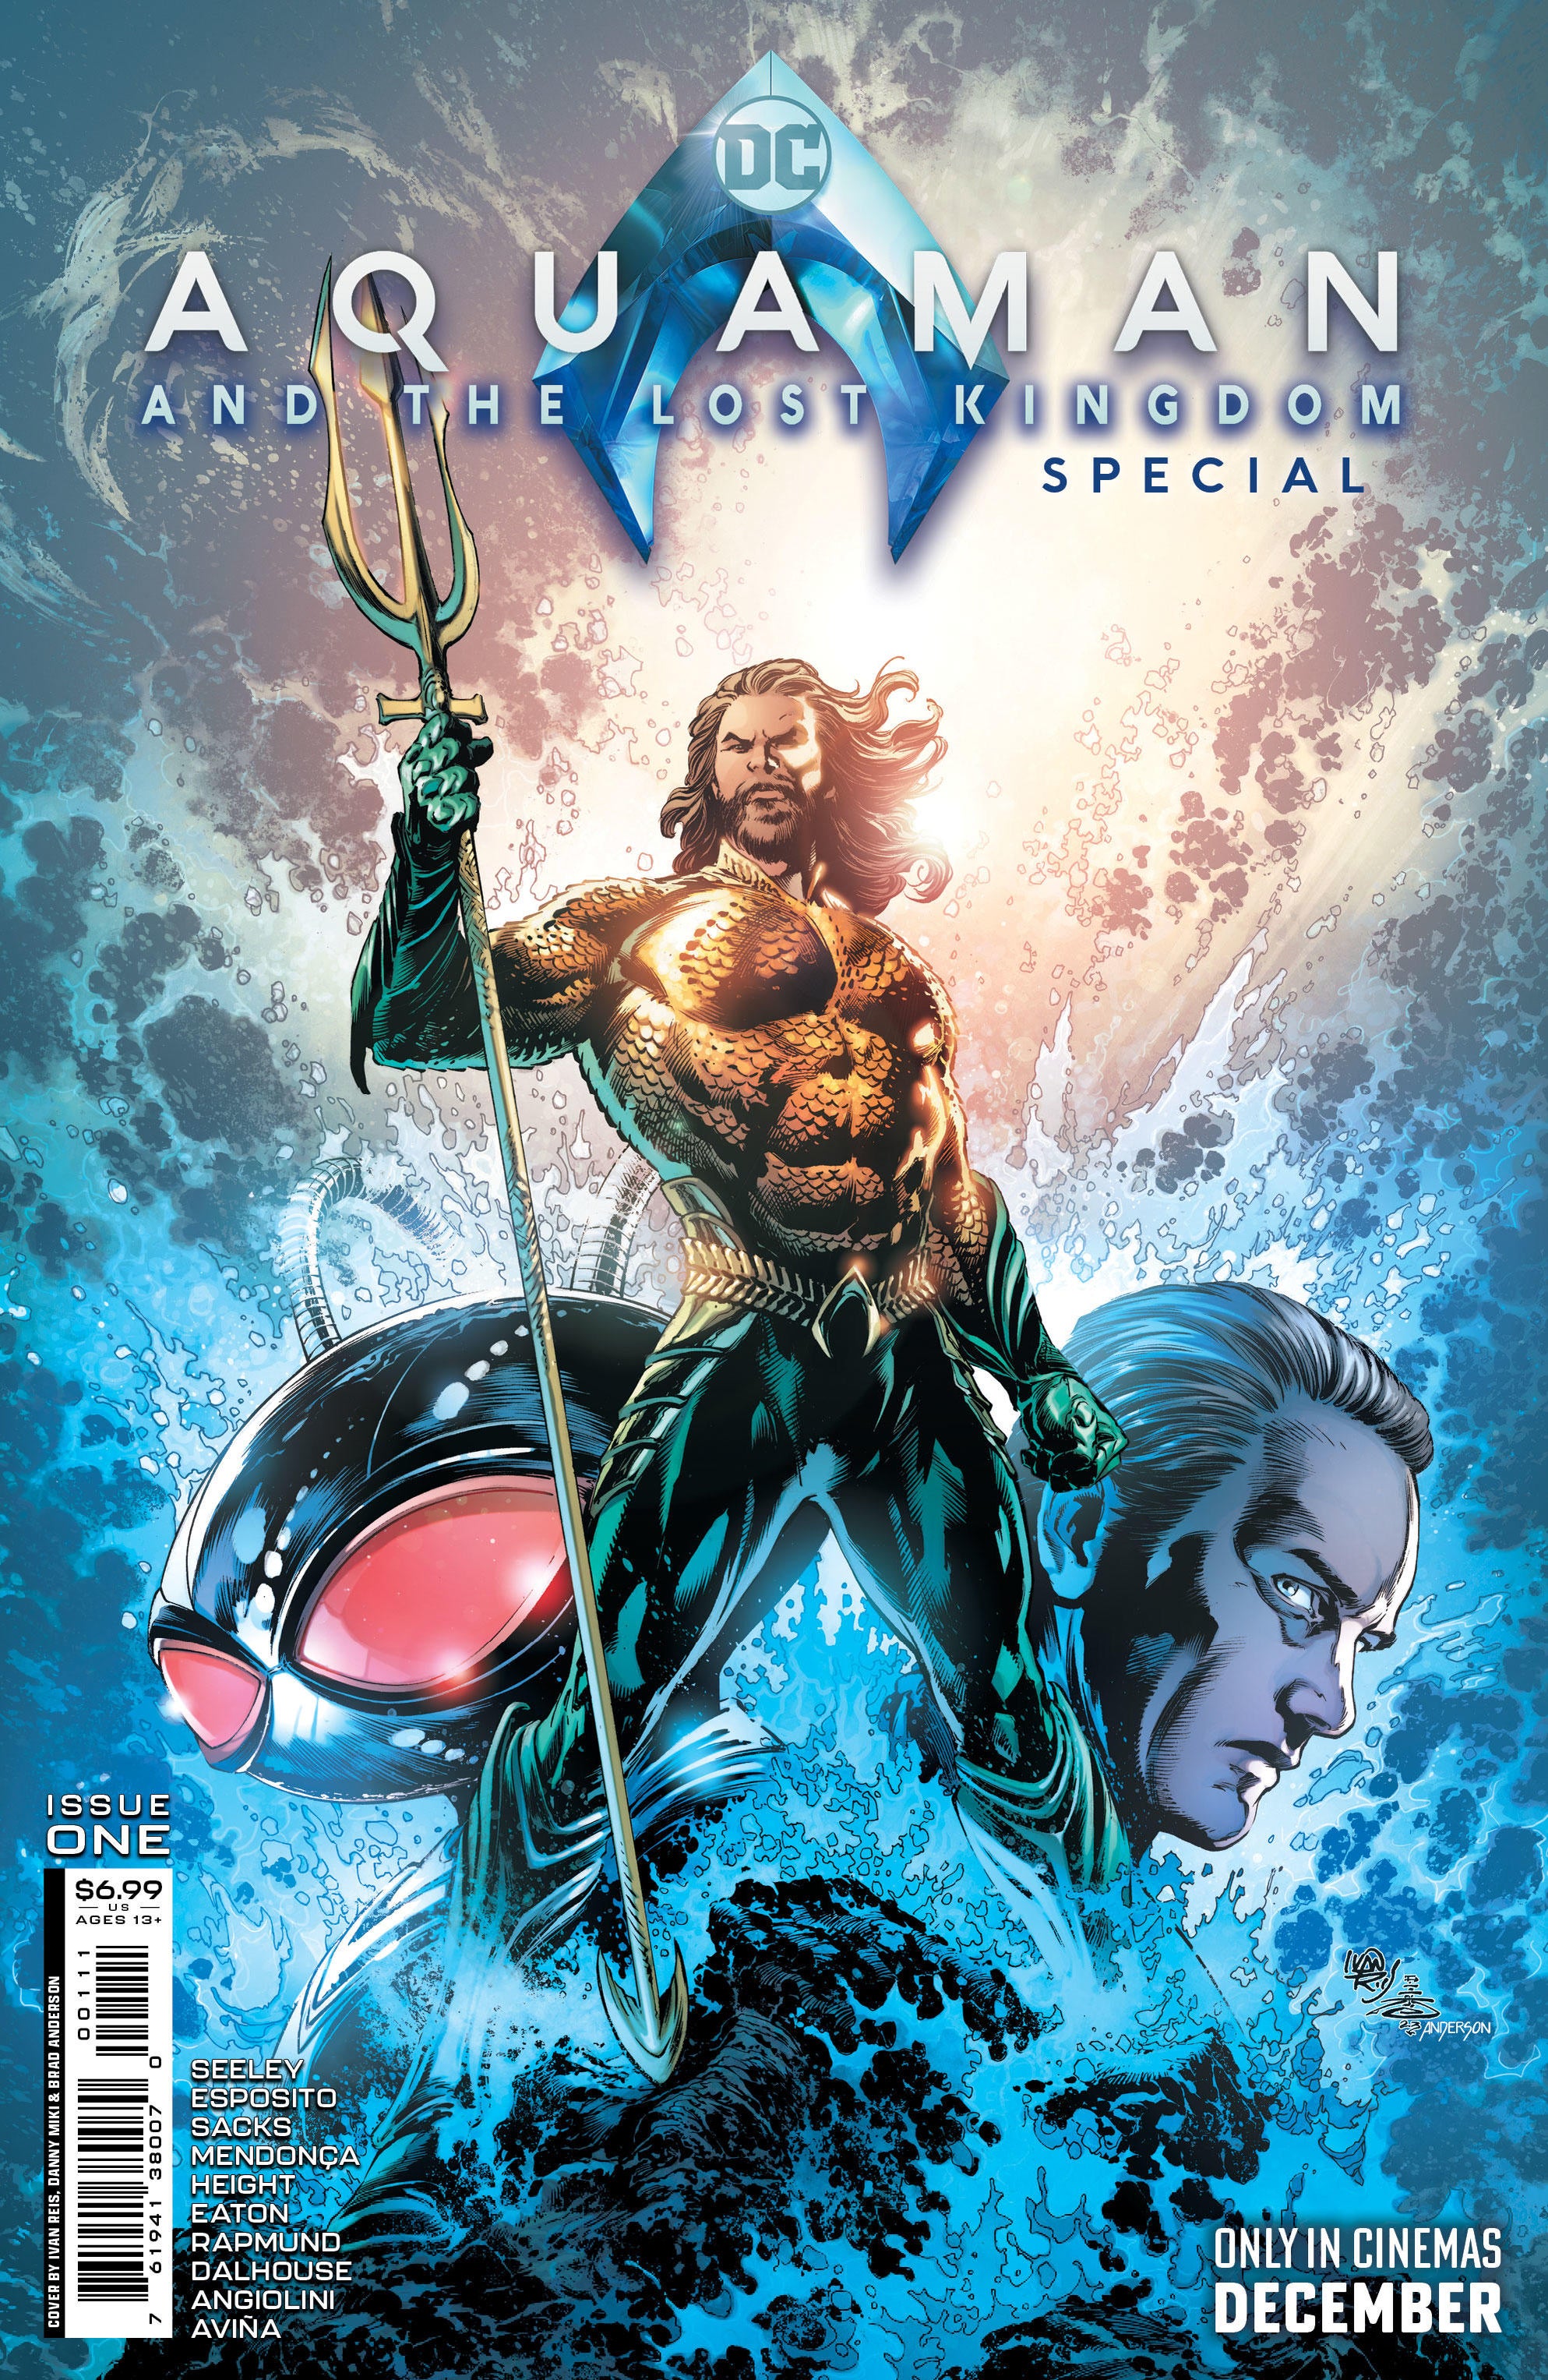 aquaman-and-the-lost-kingdom-special-1-1.jpg